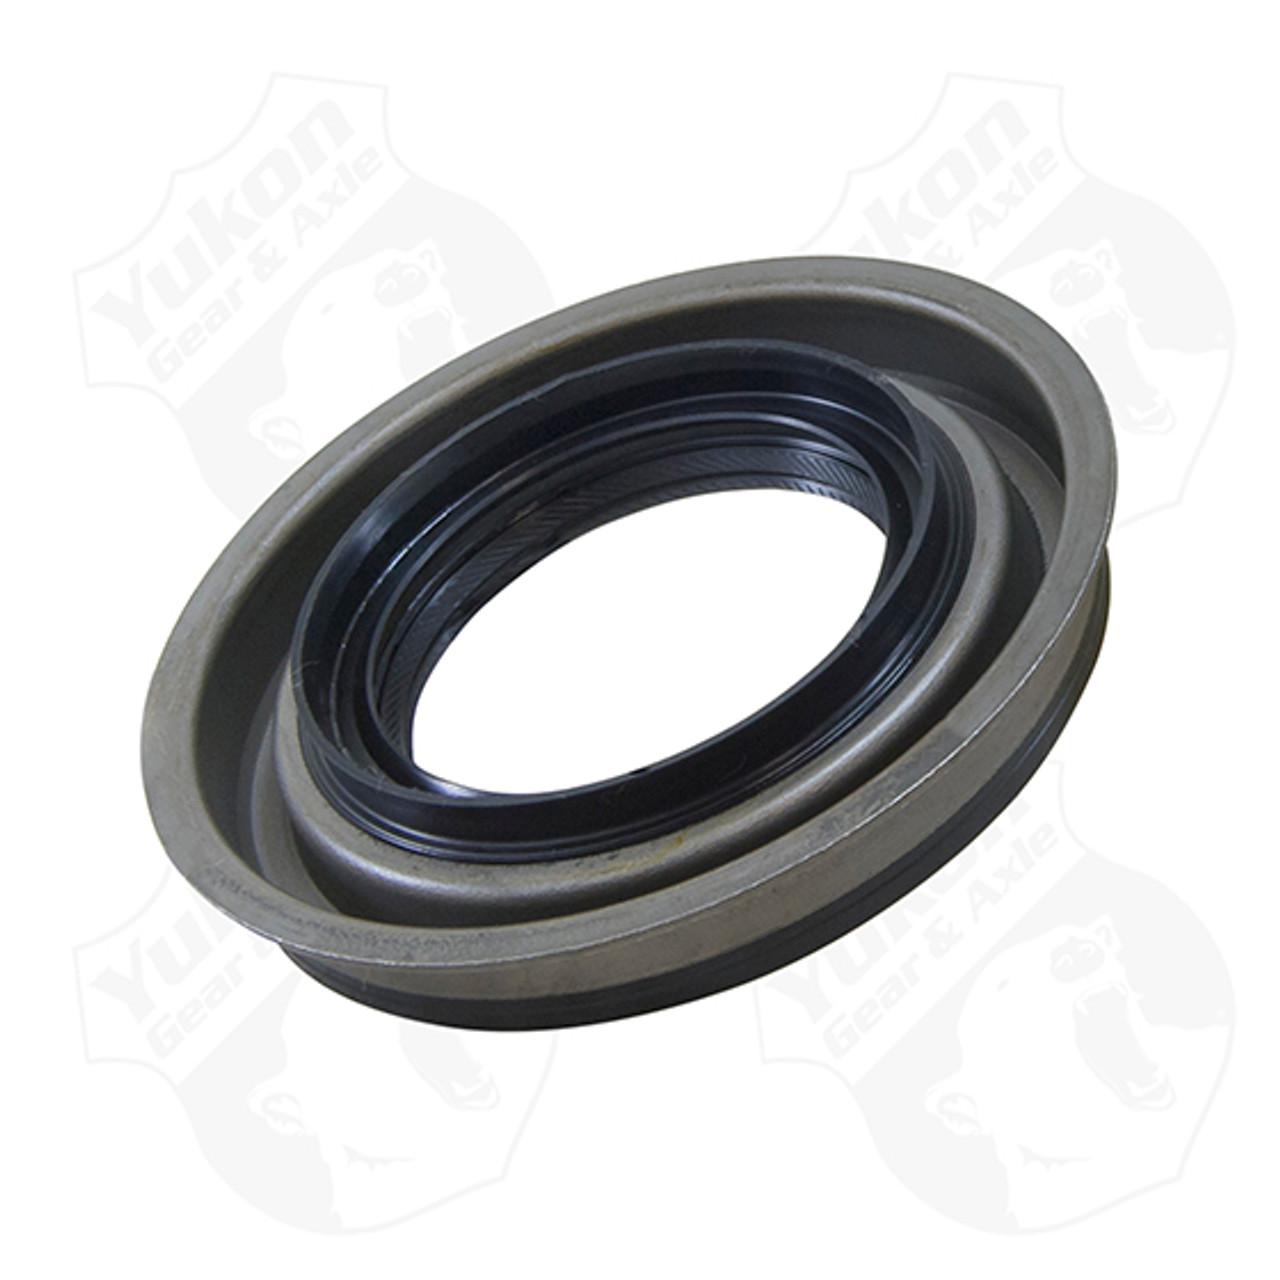 Pinion seal for 10.25" Ford